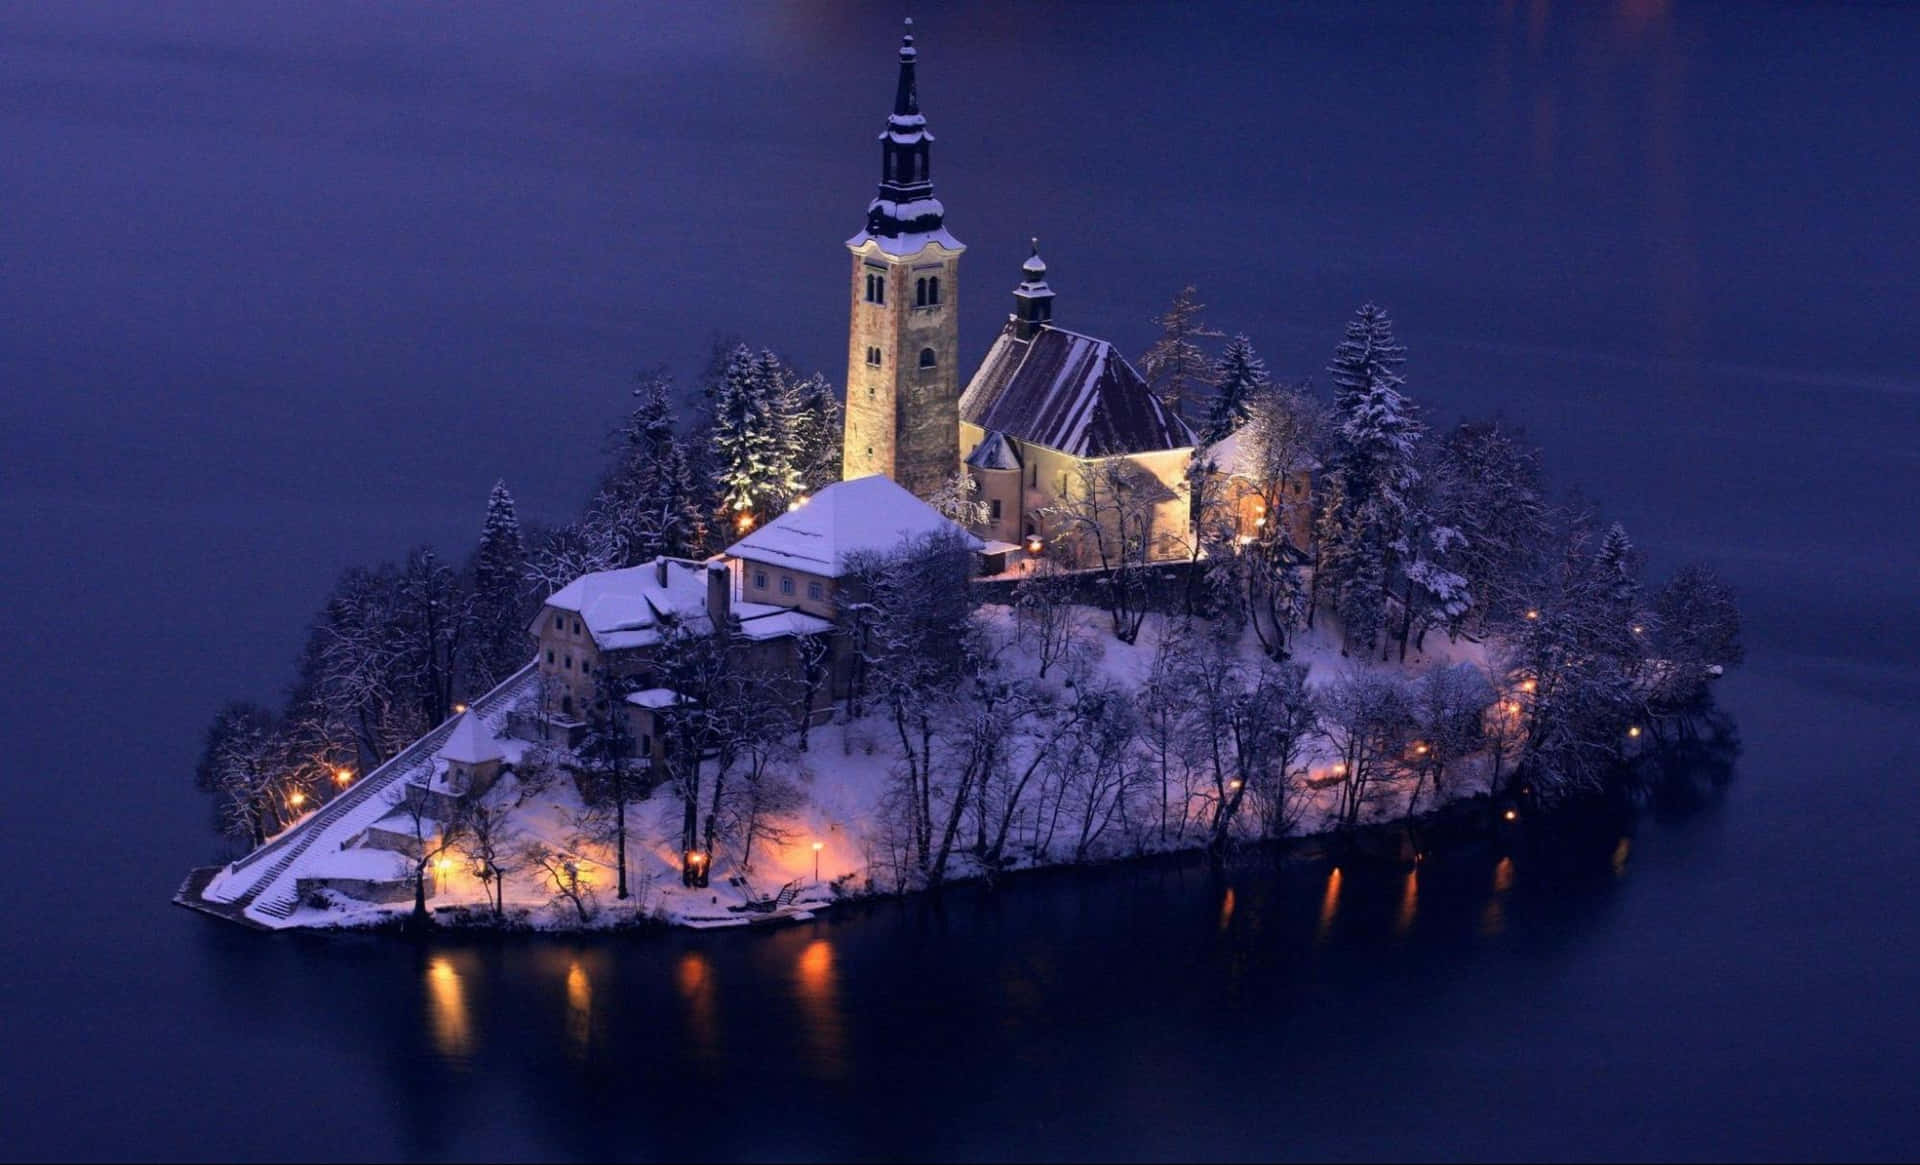 The Snowed Island In Lake Bled At Night Wallpaper